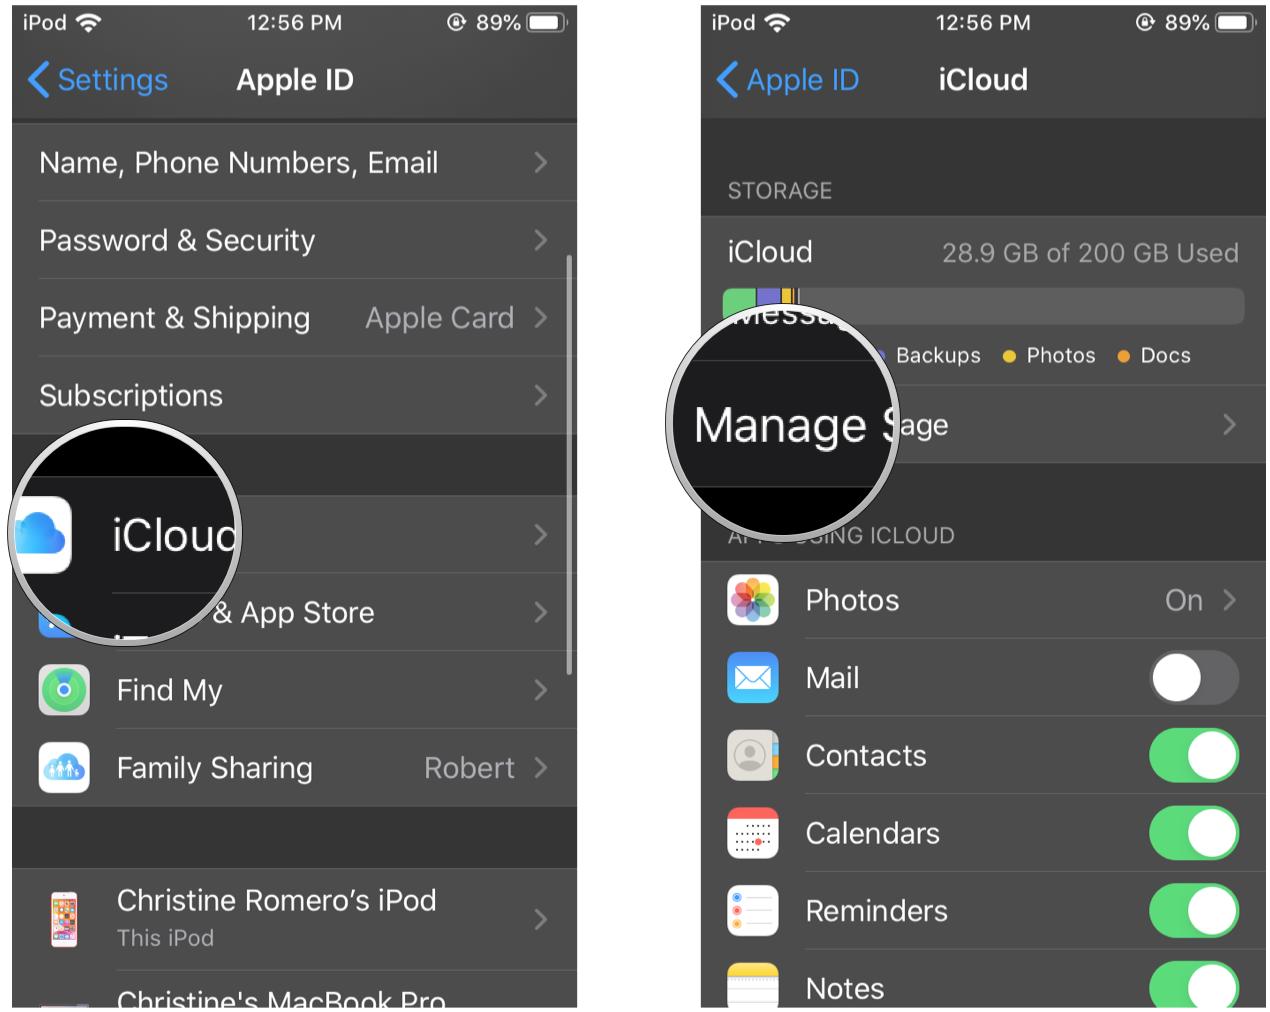 Manage your iCloud game saves by showing steps: Tap iCloud, tap Manage Storage